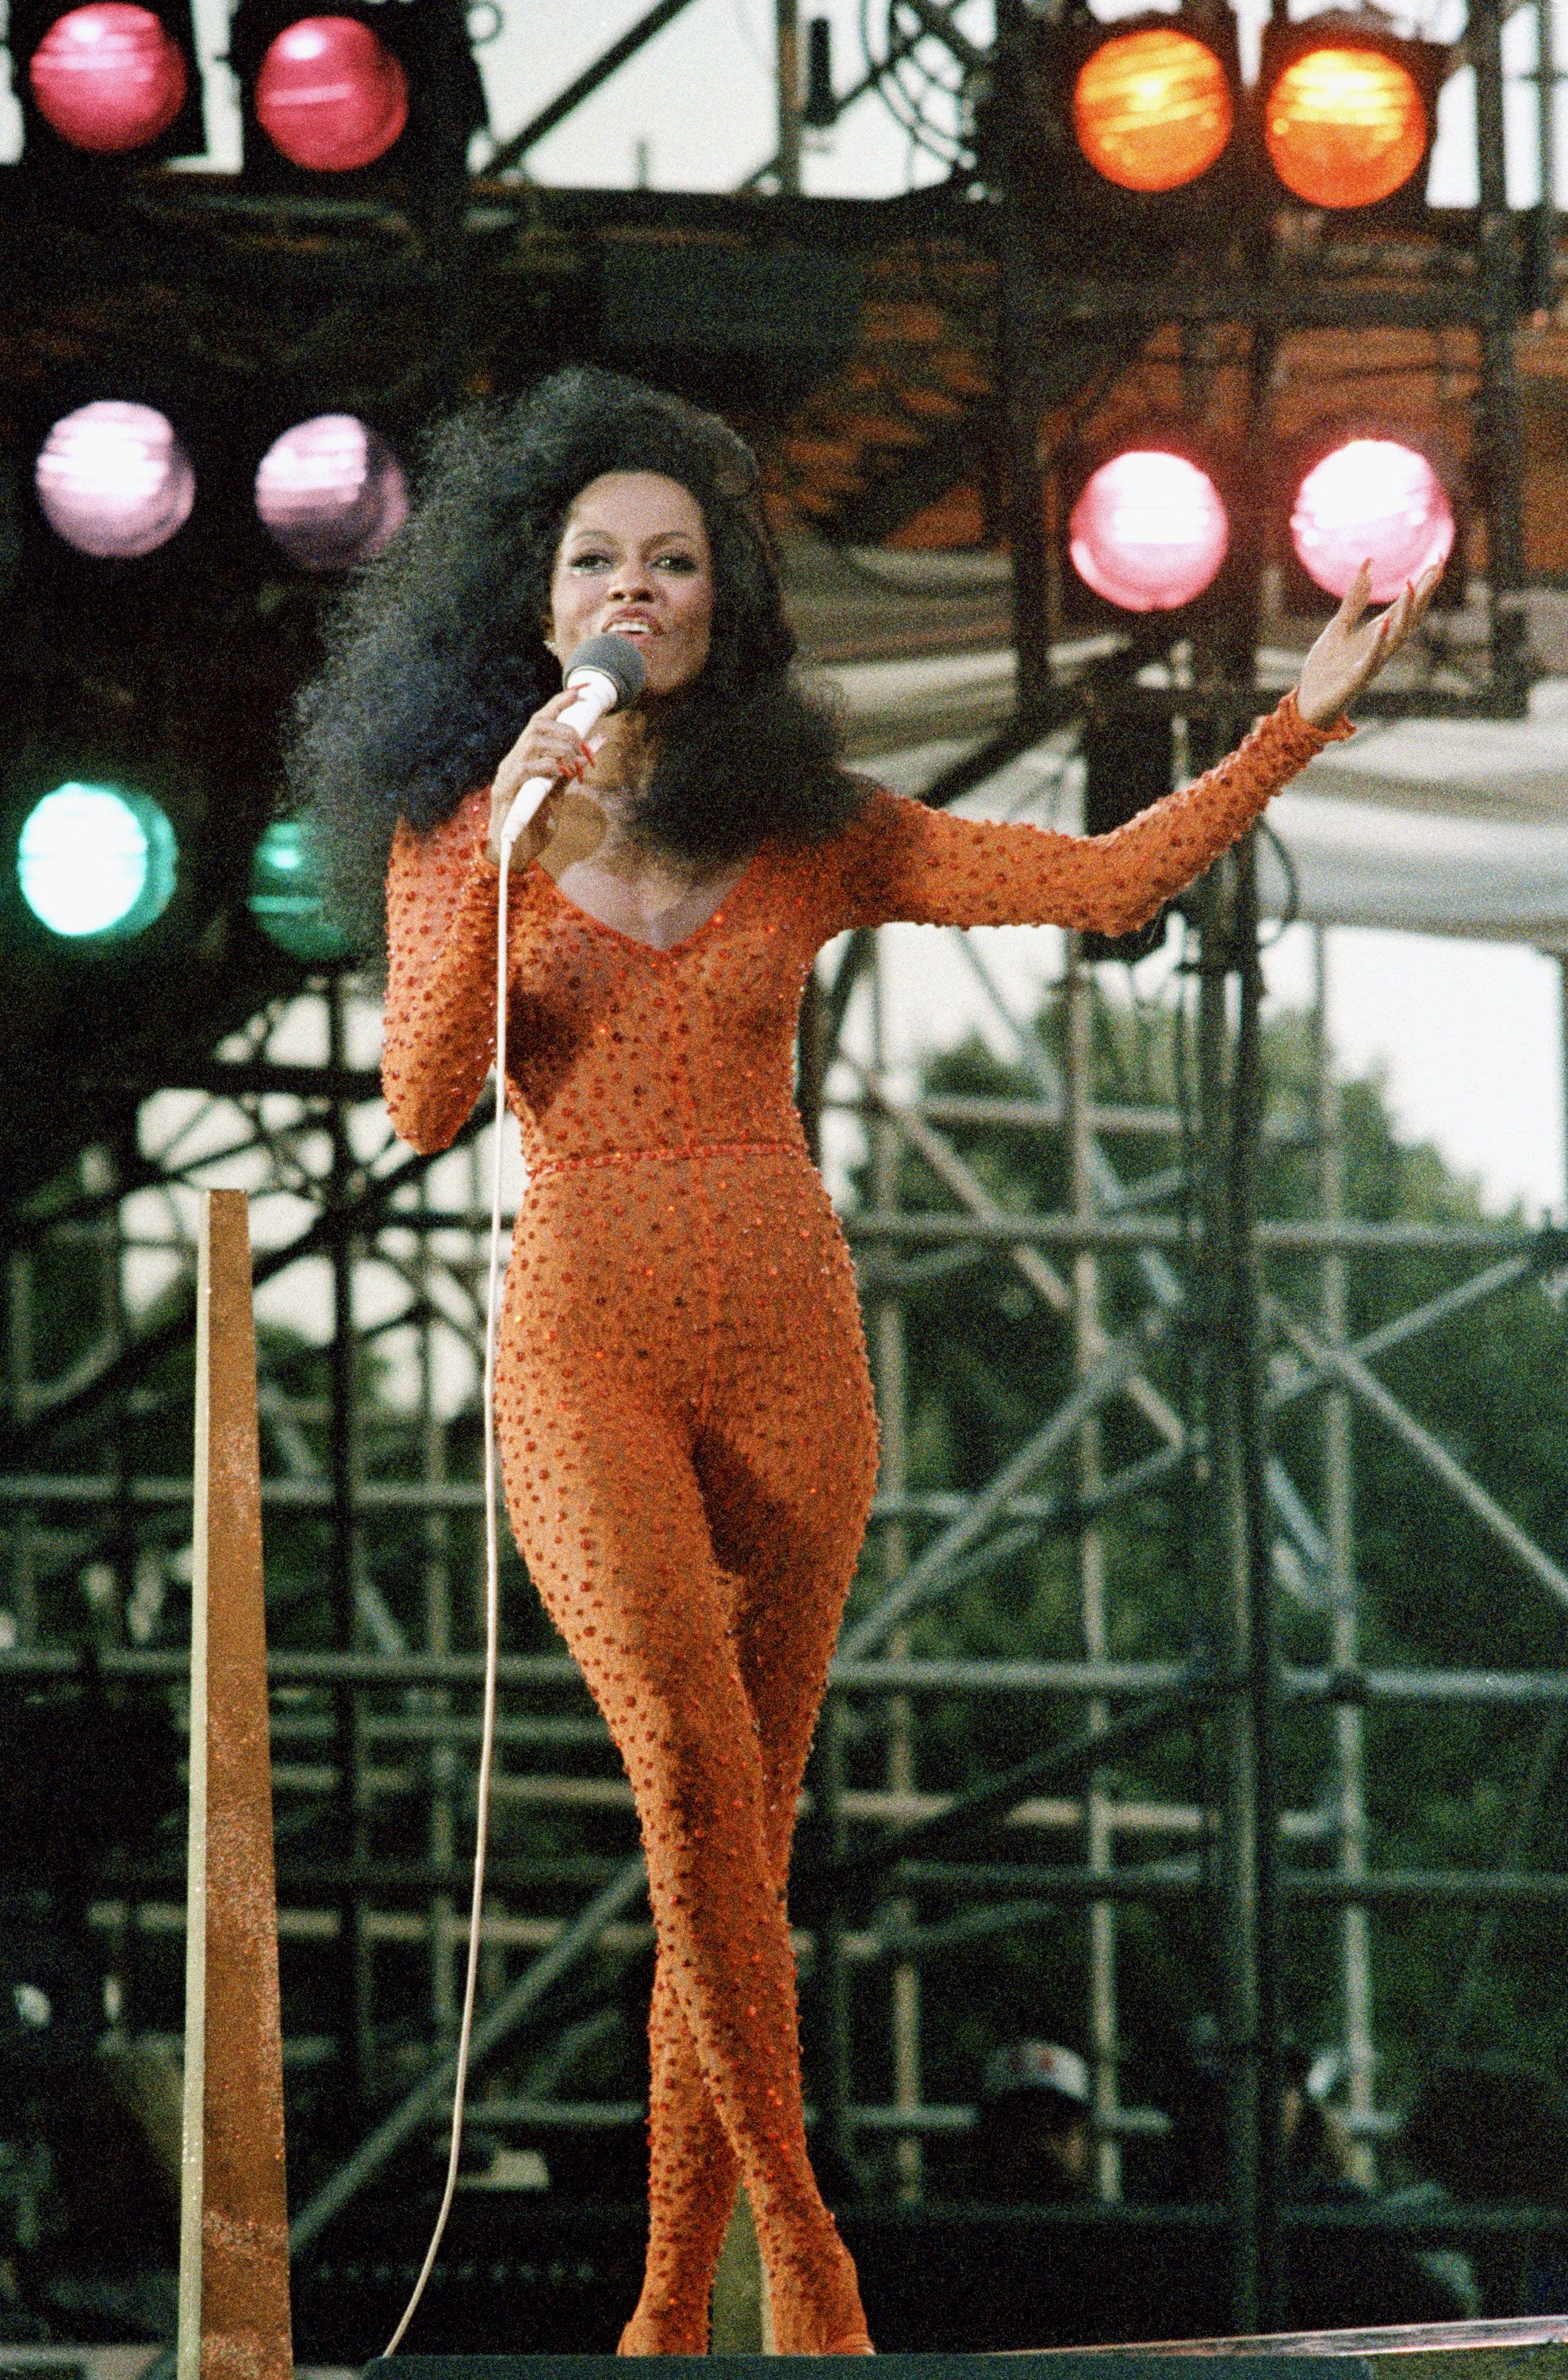 Diana Ross Dazzles During First U.S. Tour Since 2020